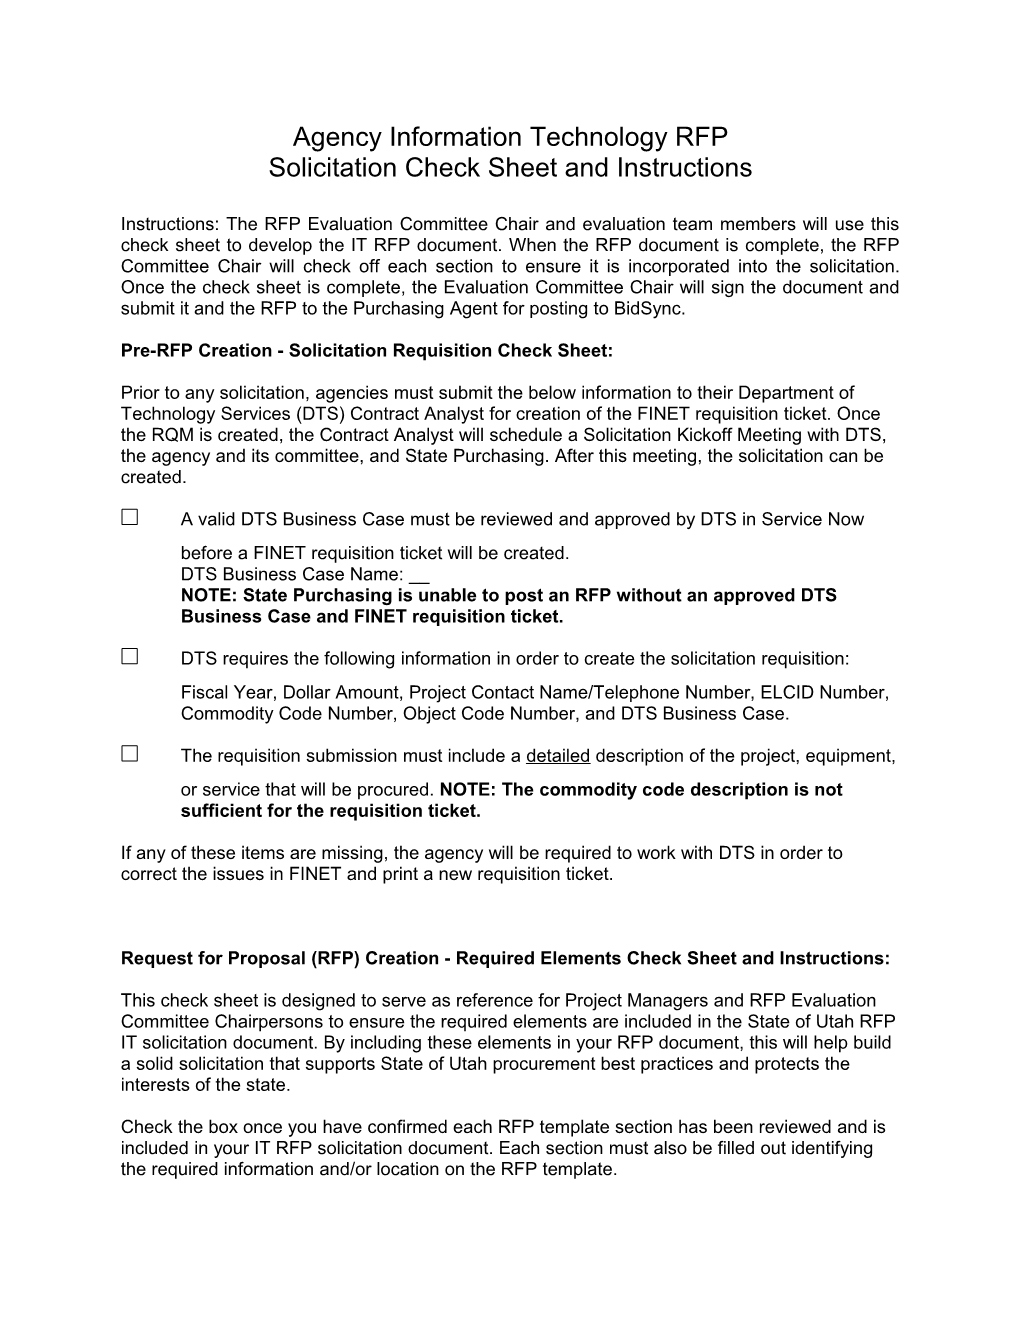 Pre-RFP Creation - Solicitation Requisition Check Sheet